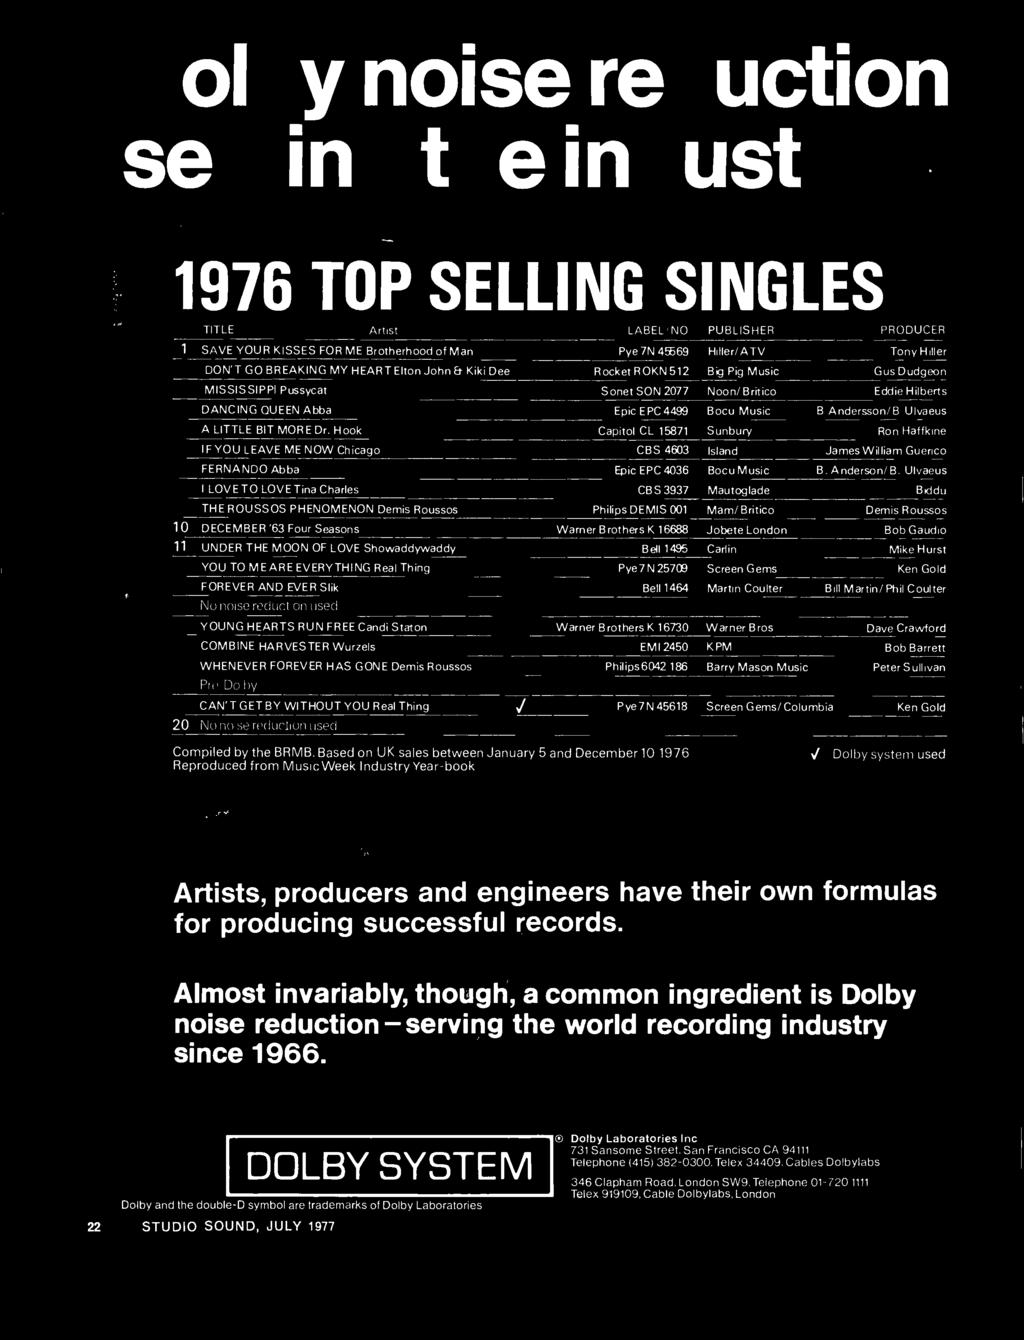 Dolby noise reduction serving the industry 1976 TOP SELLING SINGLES 1 2 IITLL Artist LABEL'NO PUBLISHER PRODUCER SAVE YOUR KISSES FOR ME Brotherhood of Man Pye 7N 45569 Hiller /ATV Tony Hiller DON'T